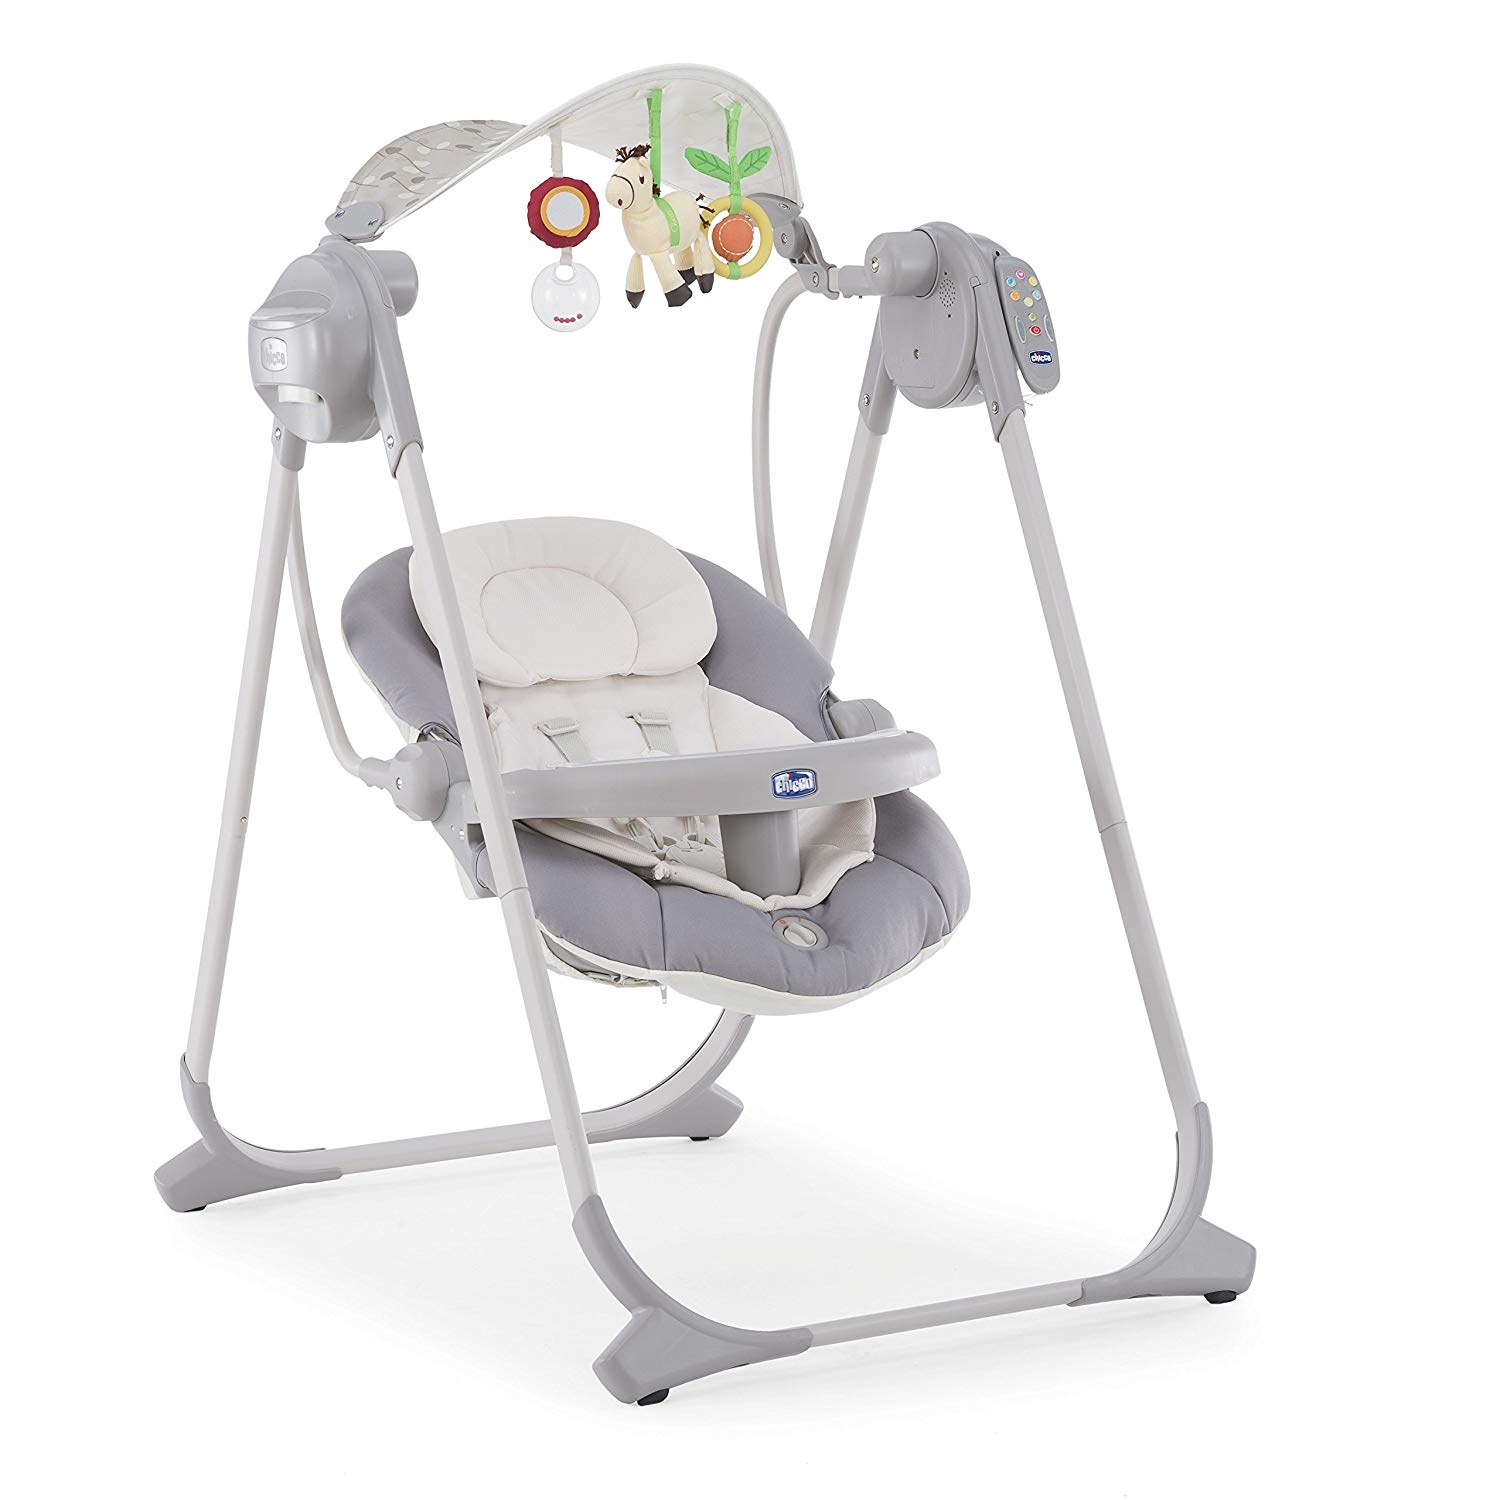 Chicco Polly Swing Up Electronic Baby Rocker from Birth to 9 kg, Adjustable Baby Swing and Automatic Rocker with Vibration, Music and Remote Control, with Compact Closure